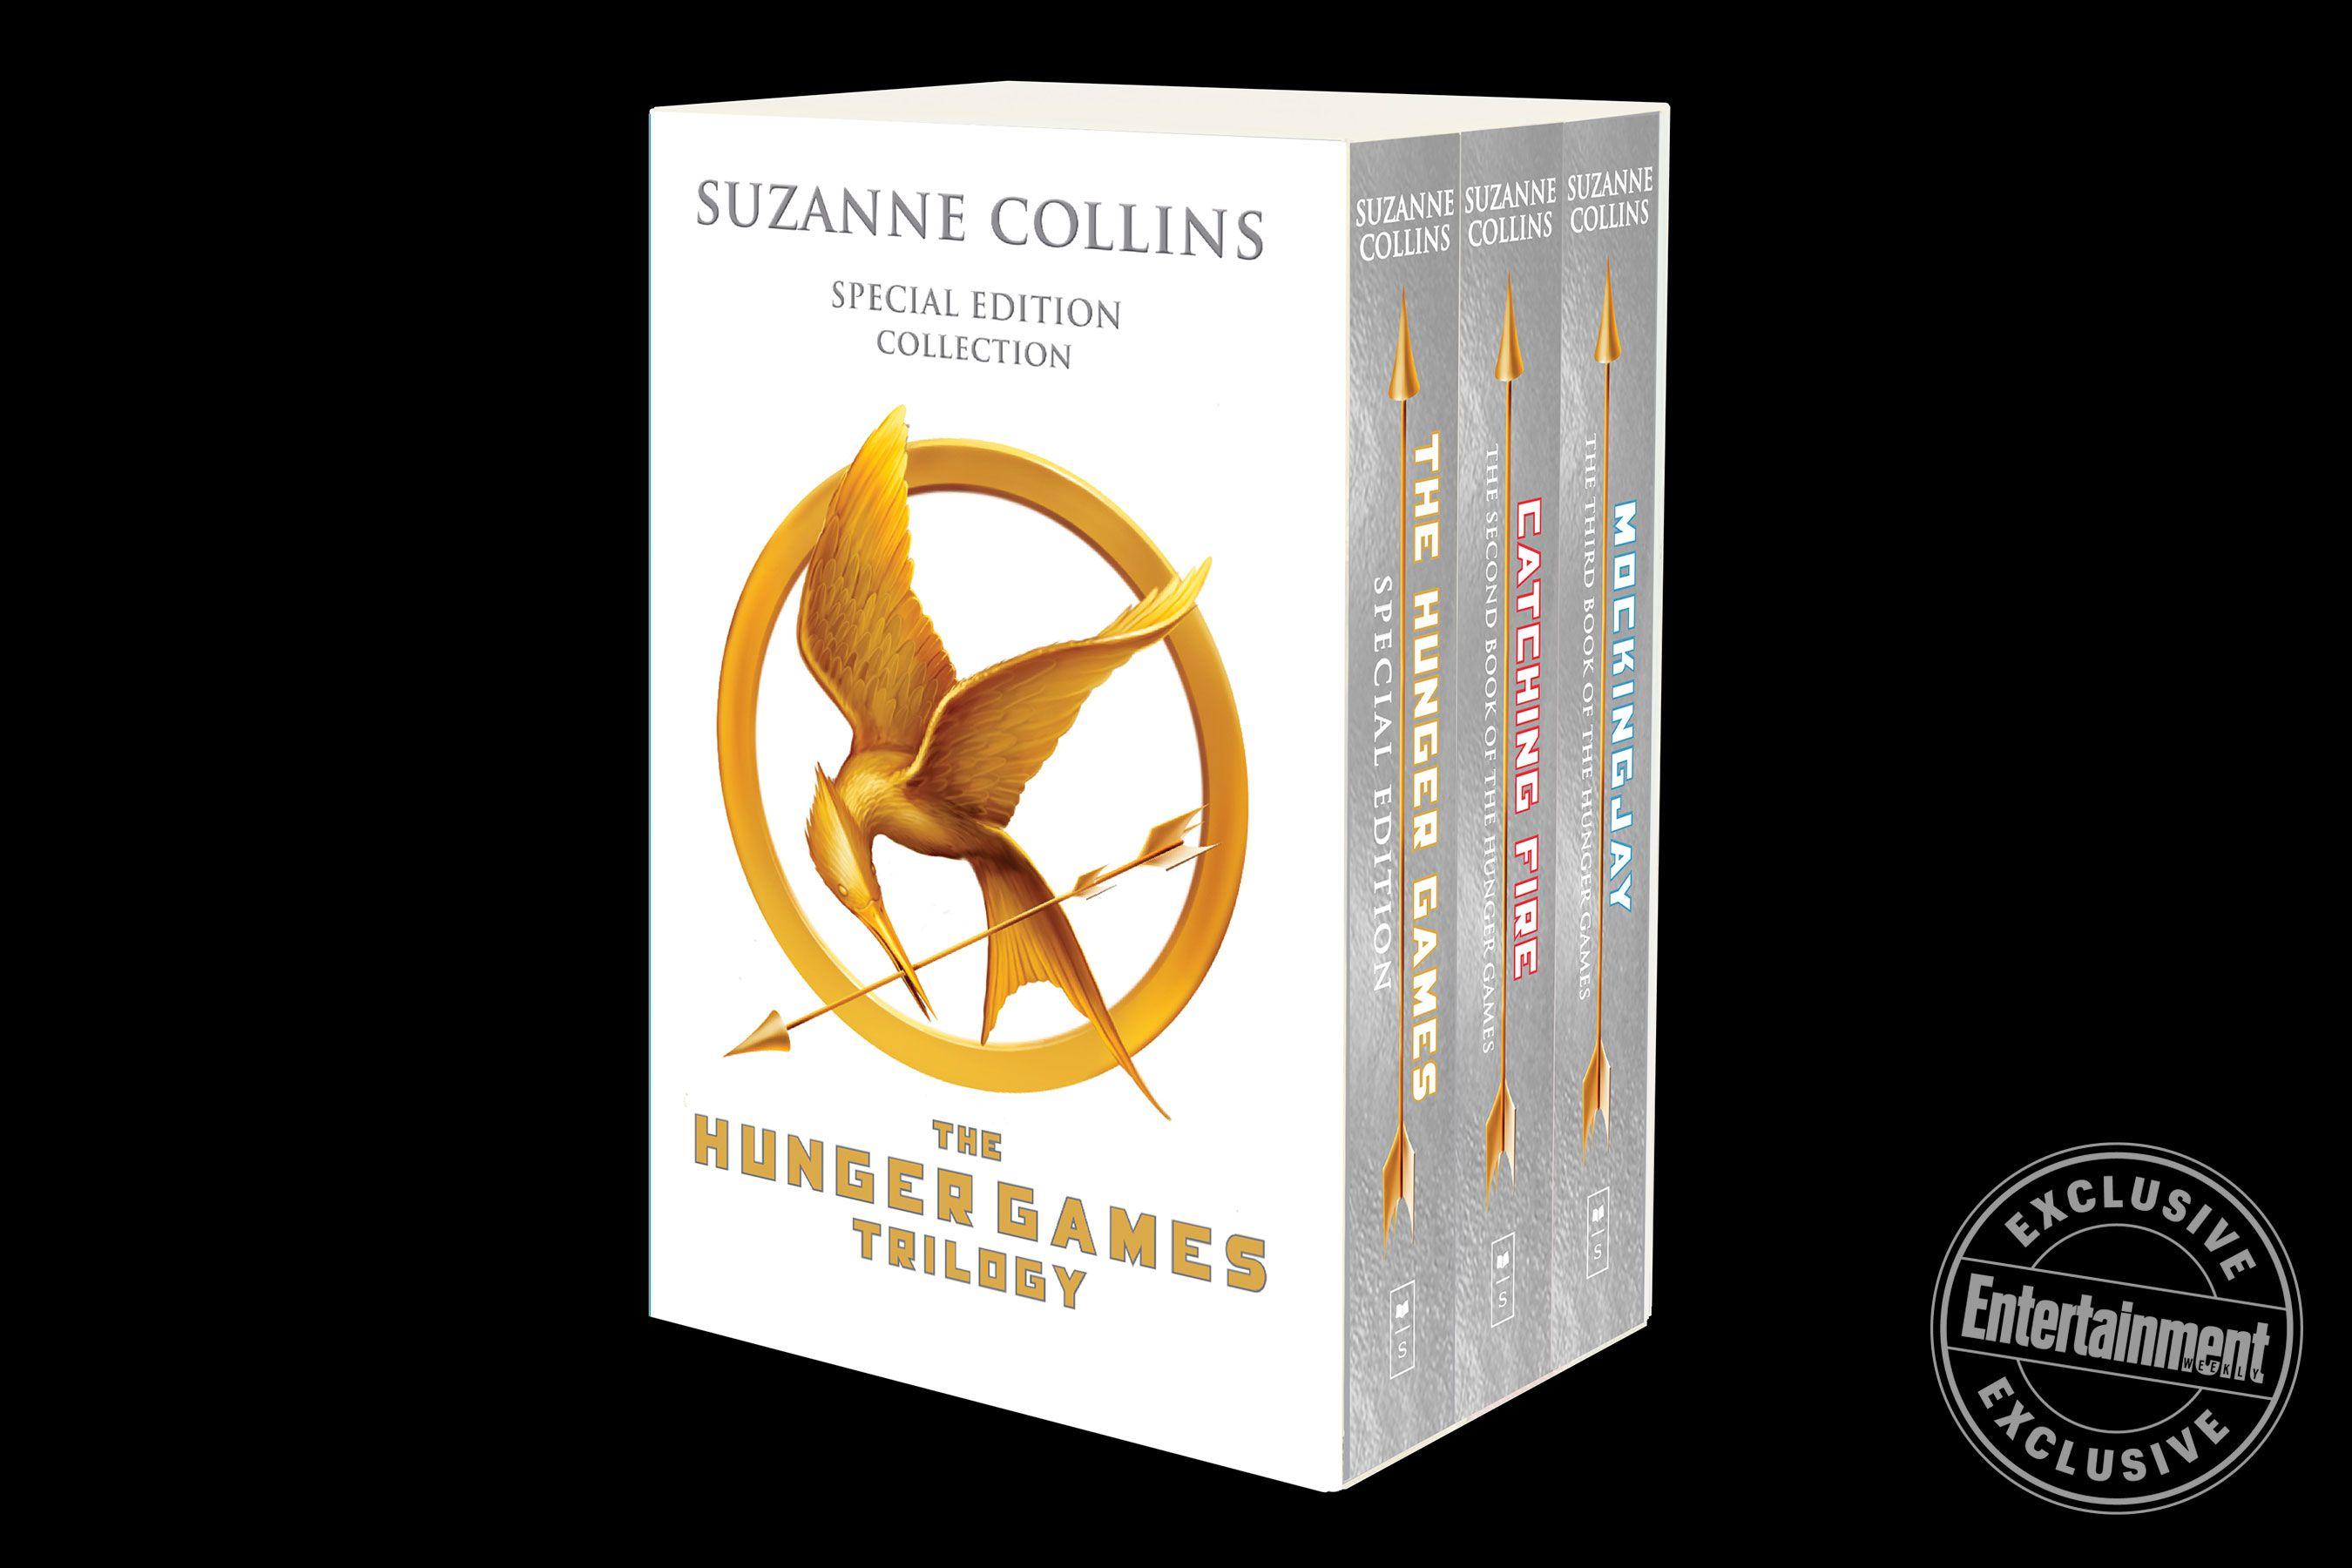 10th Anniversary Edition Logo - The Hunger Games gets special 10th anniversary covers, new content